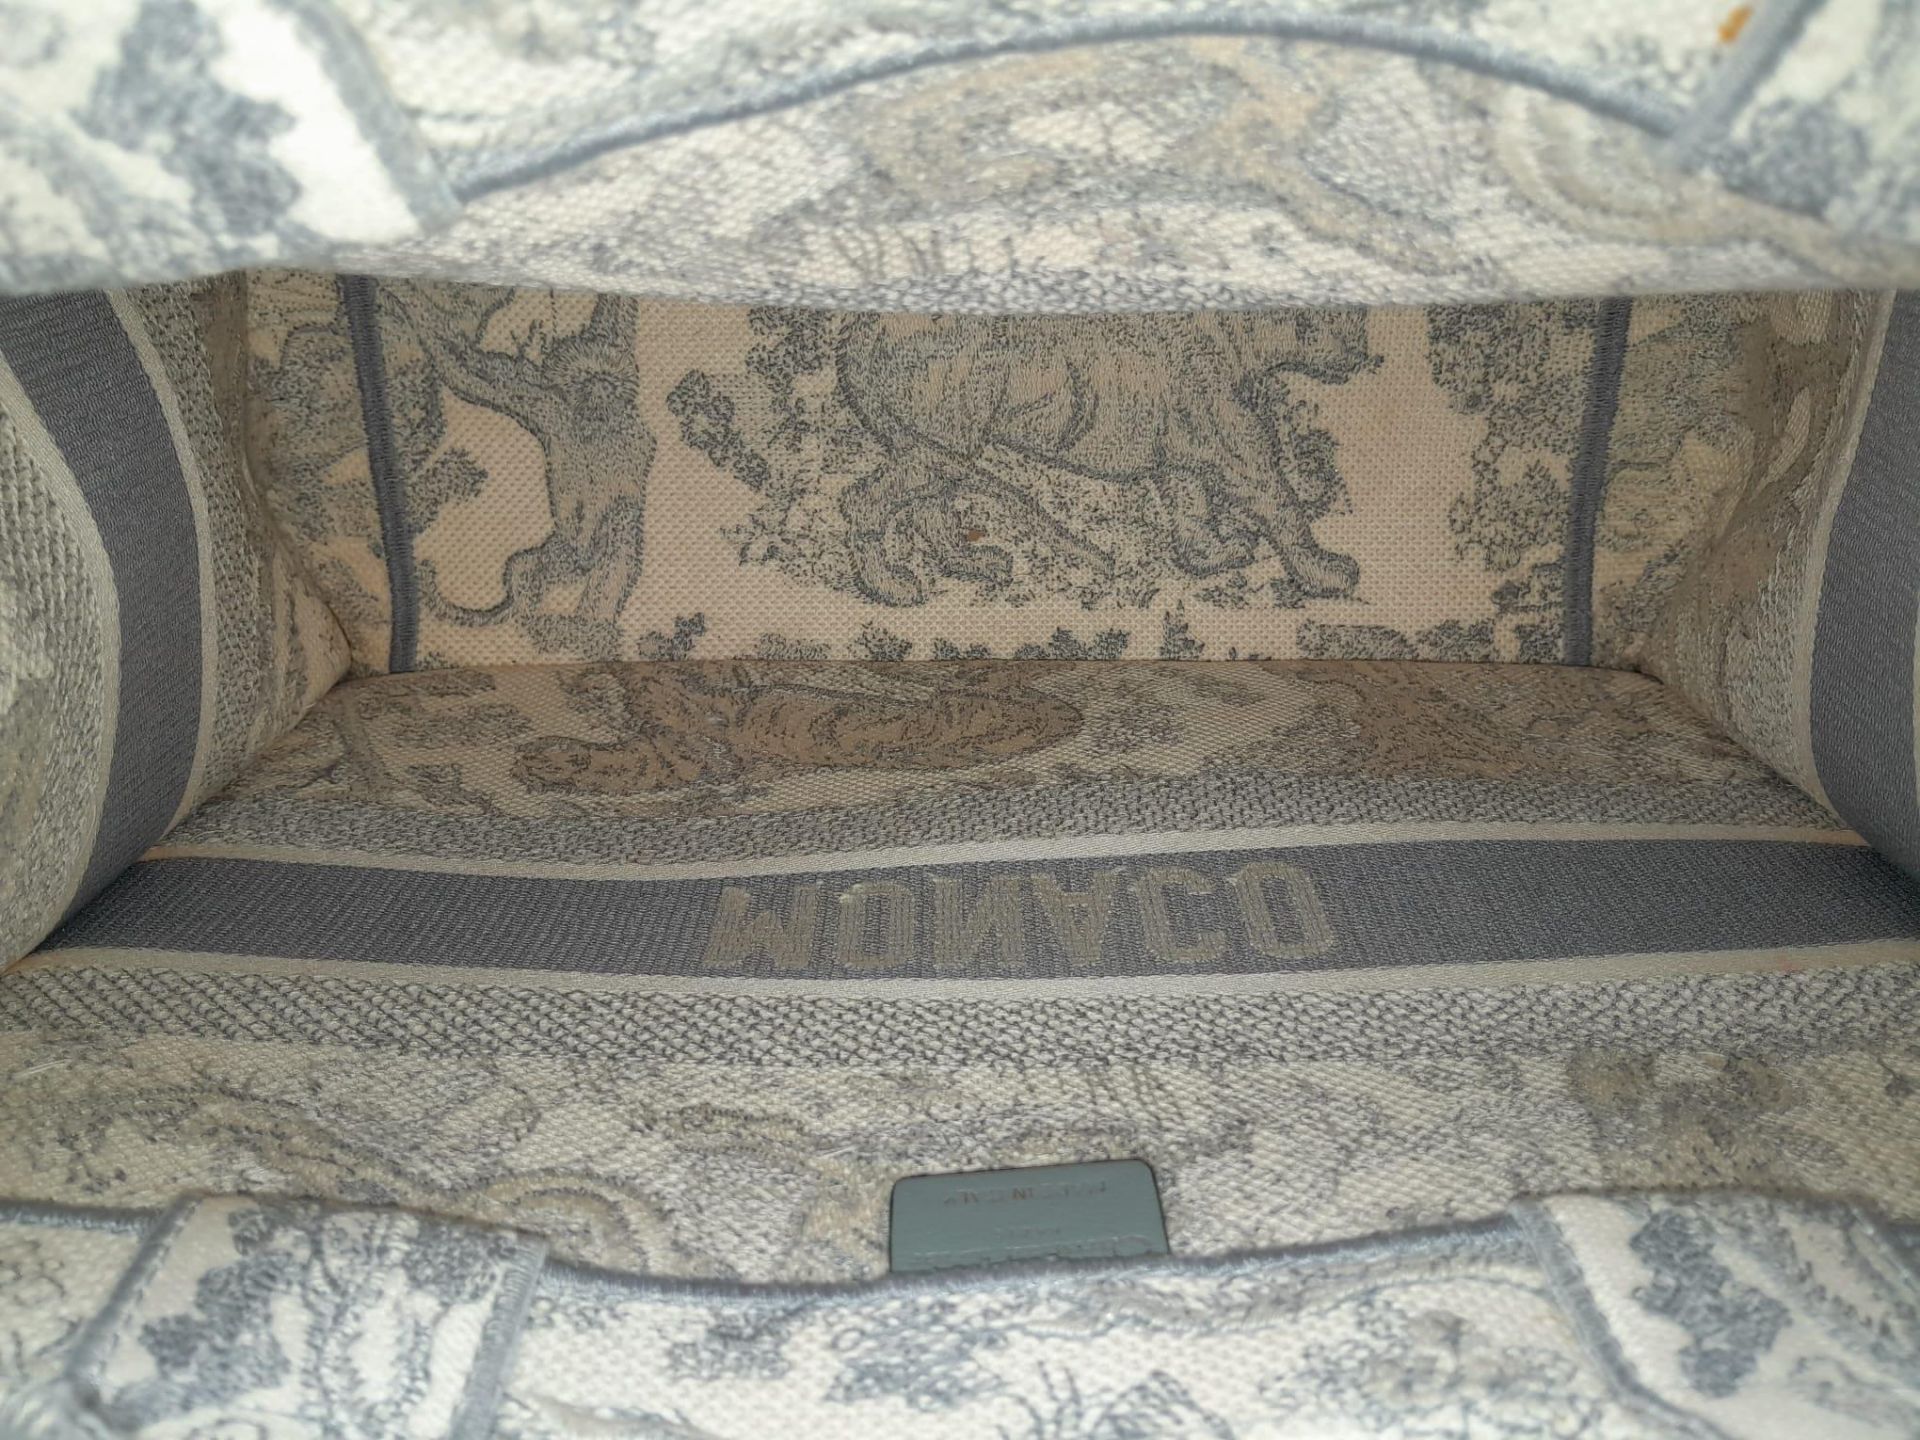 A Christian Dior small toile de jouy book tote bag, grey/white embroidery, top handles. Size approx. - Image 5 of 7